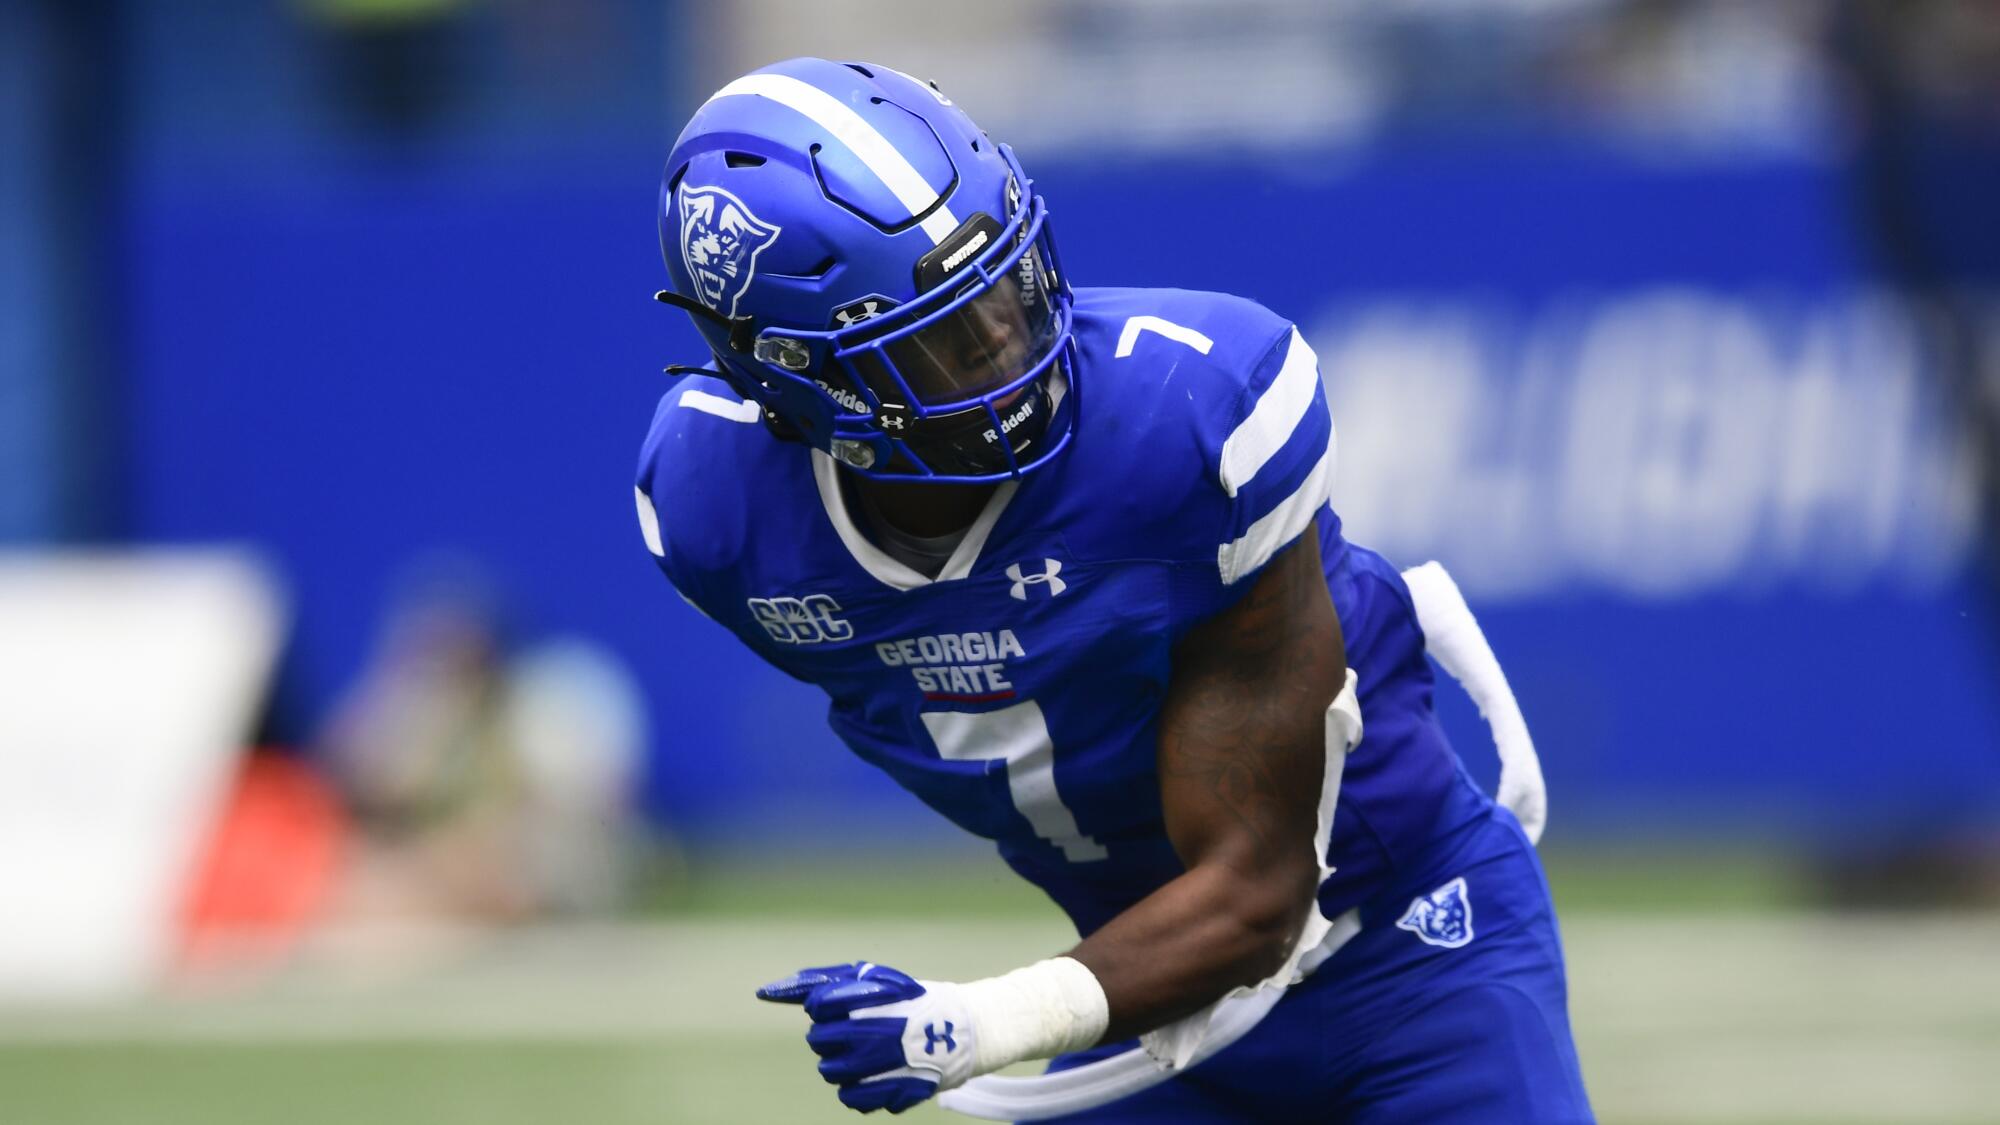 Jamil Muhammad plays for Georgia State against Louisiana Lafayette in September 2020.